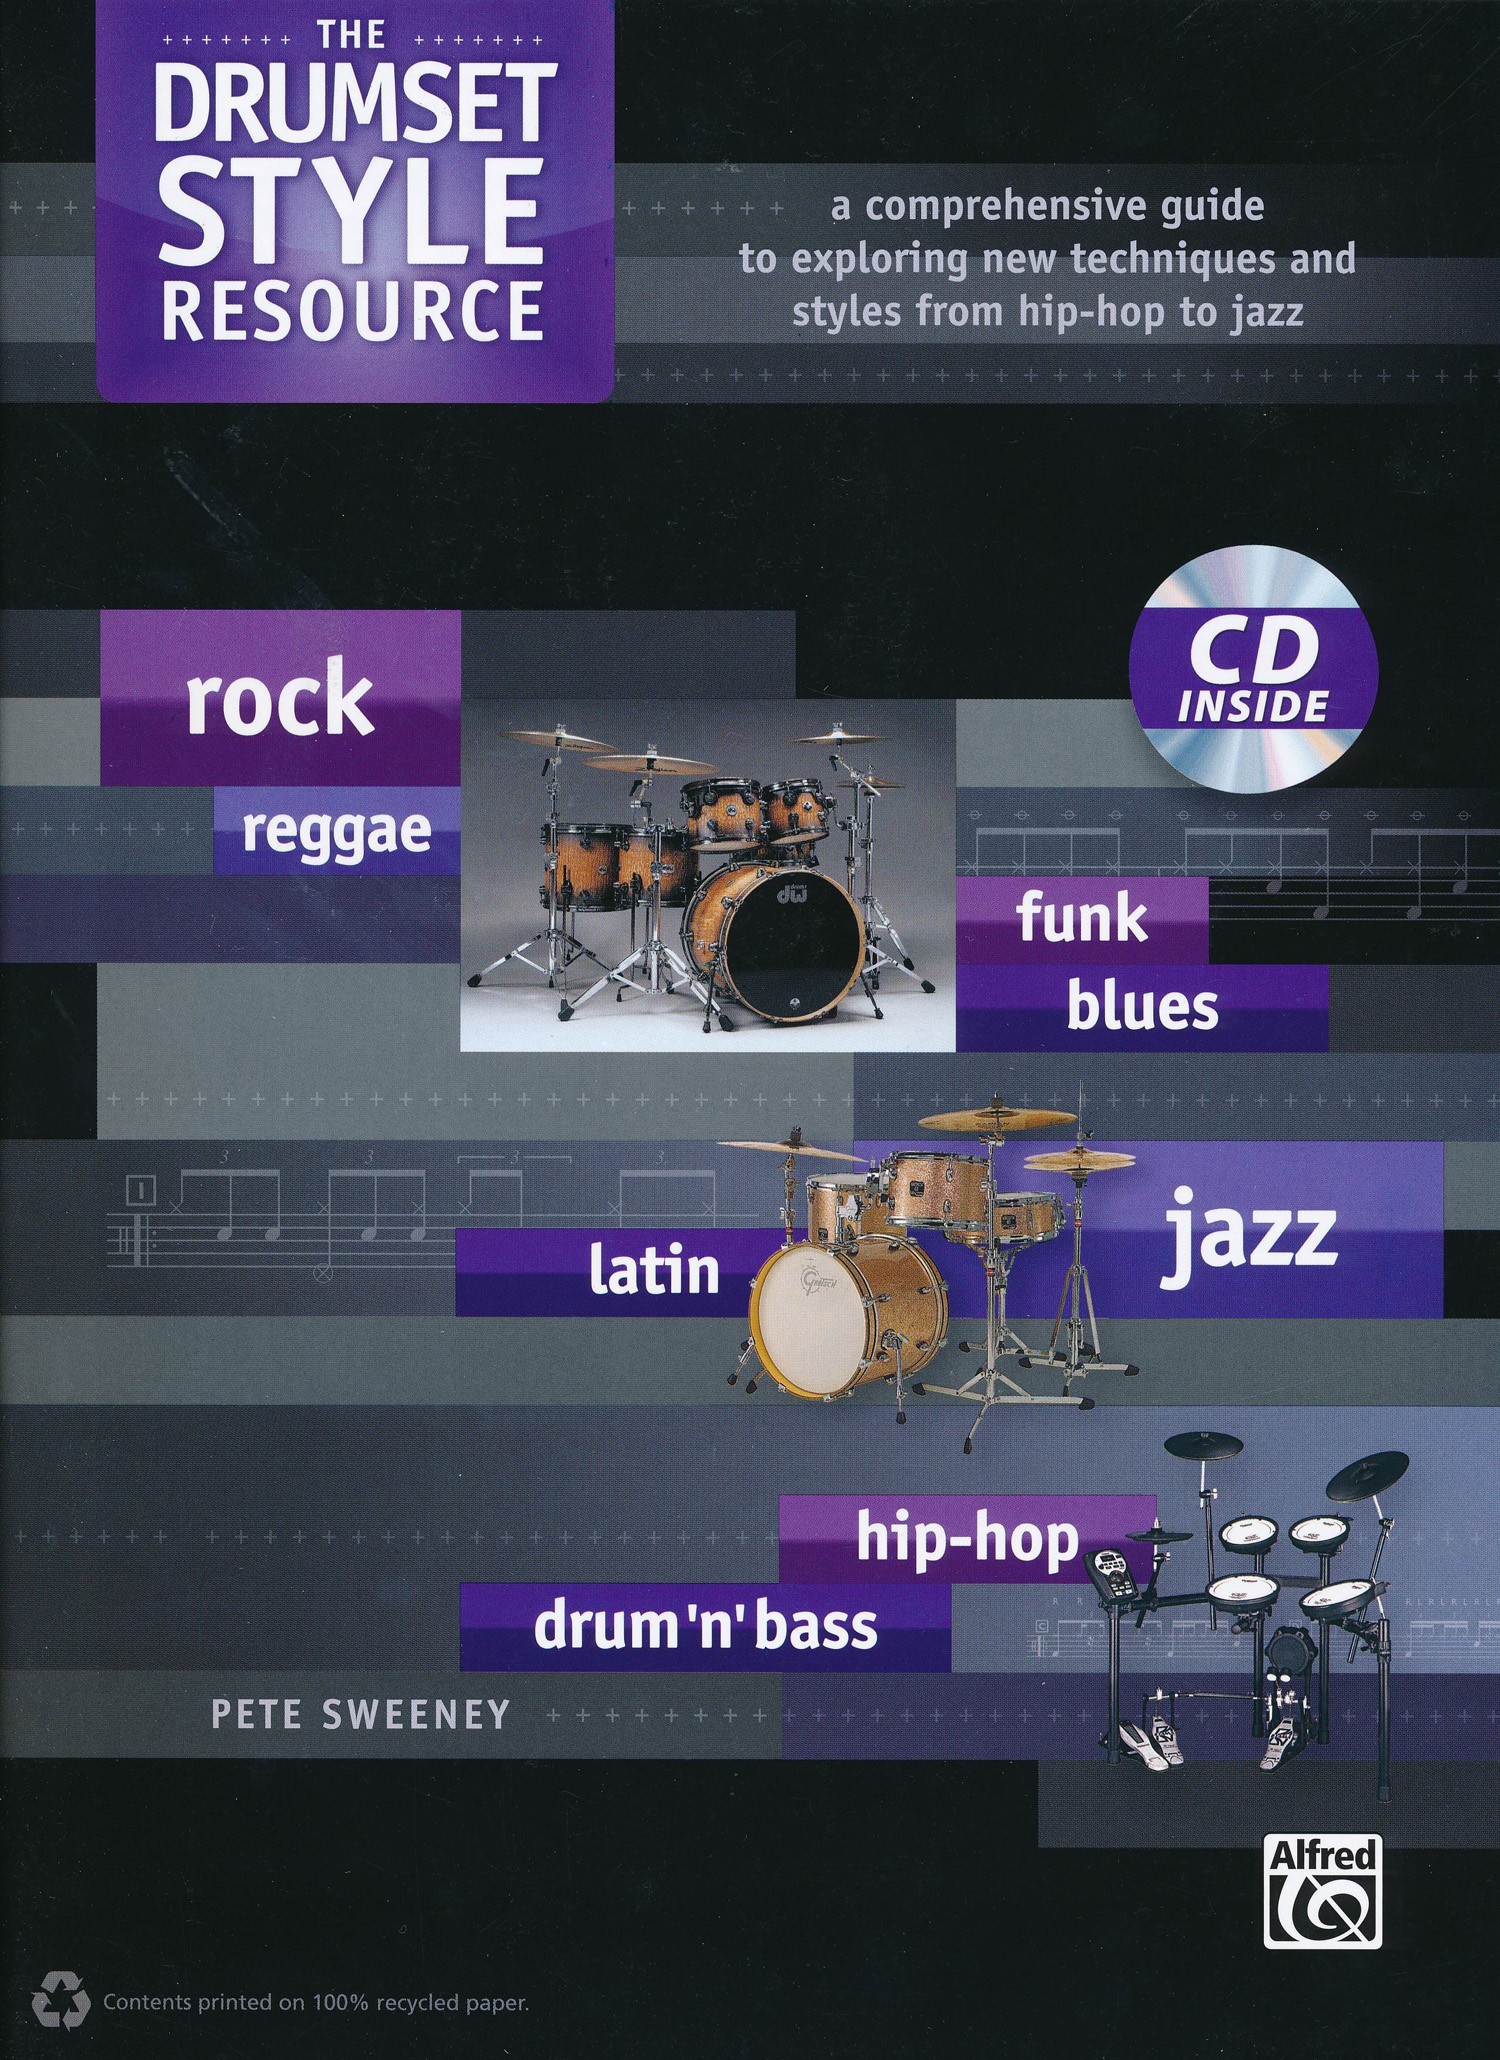 The Drumset Style Resource